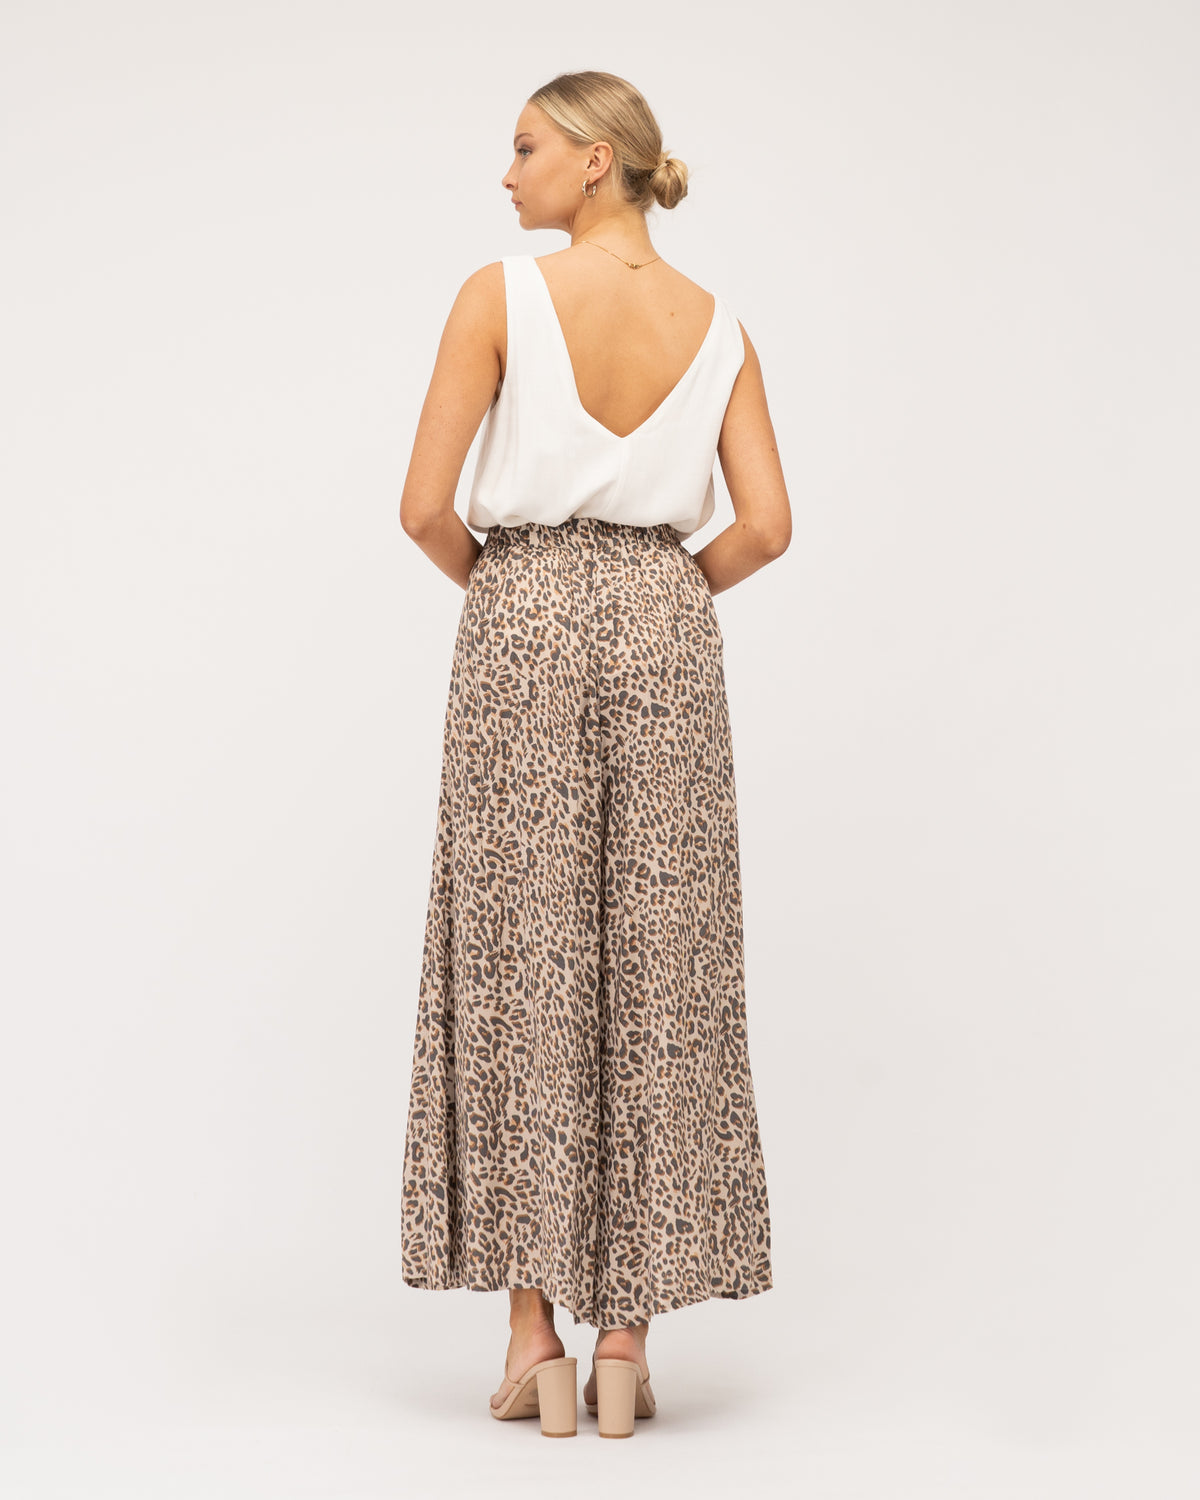 A model wearing animal print wide-leg pants featuring a flat front waistband, an elastic back waistband, and a wide leg design curated by Global Fashion House.